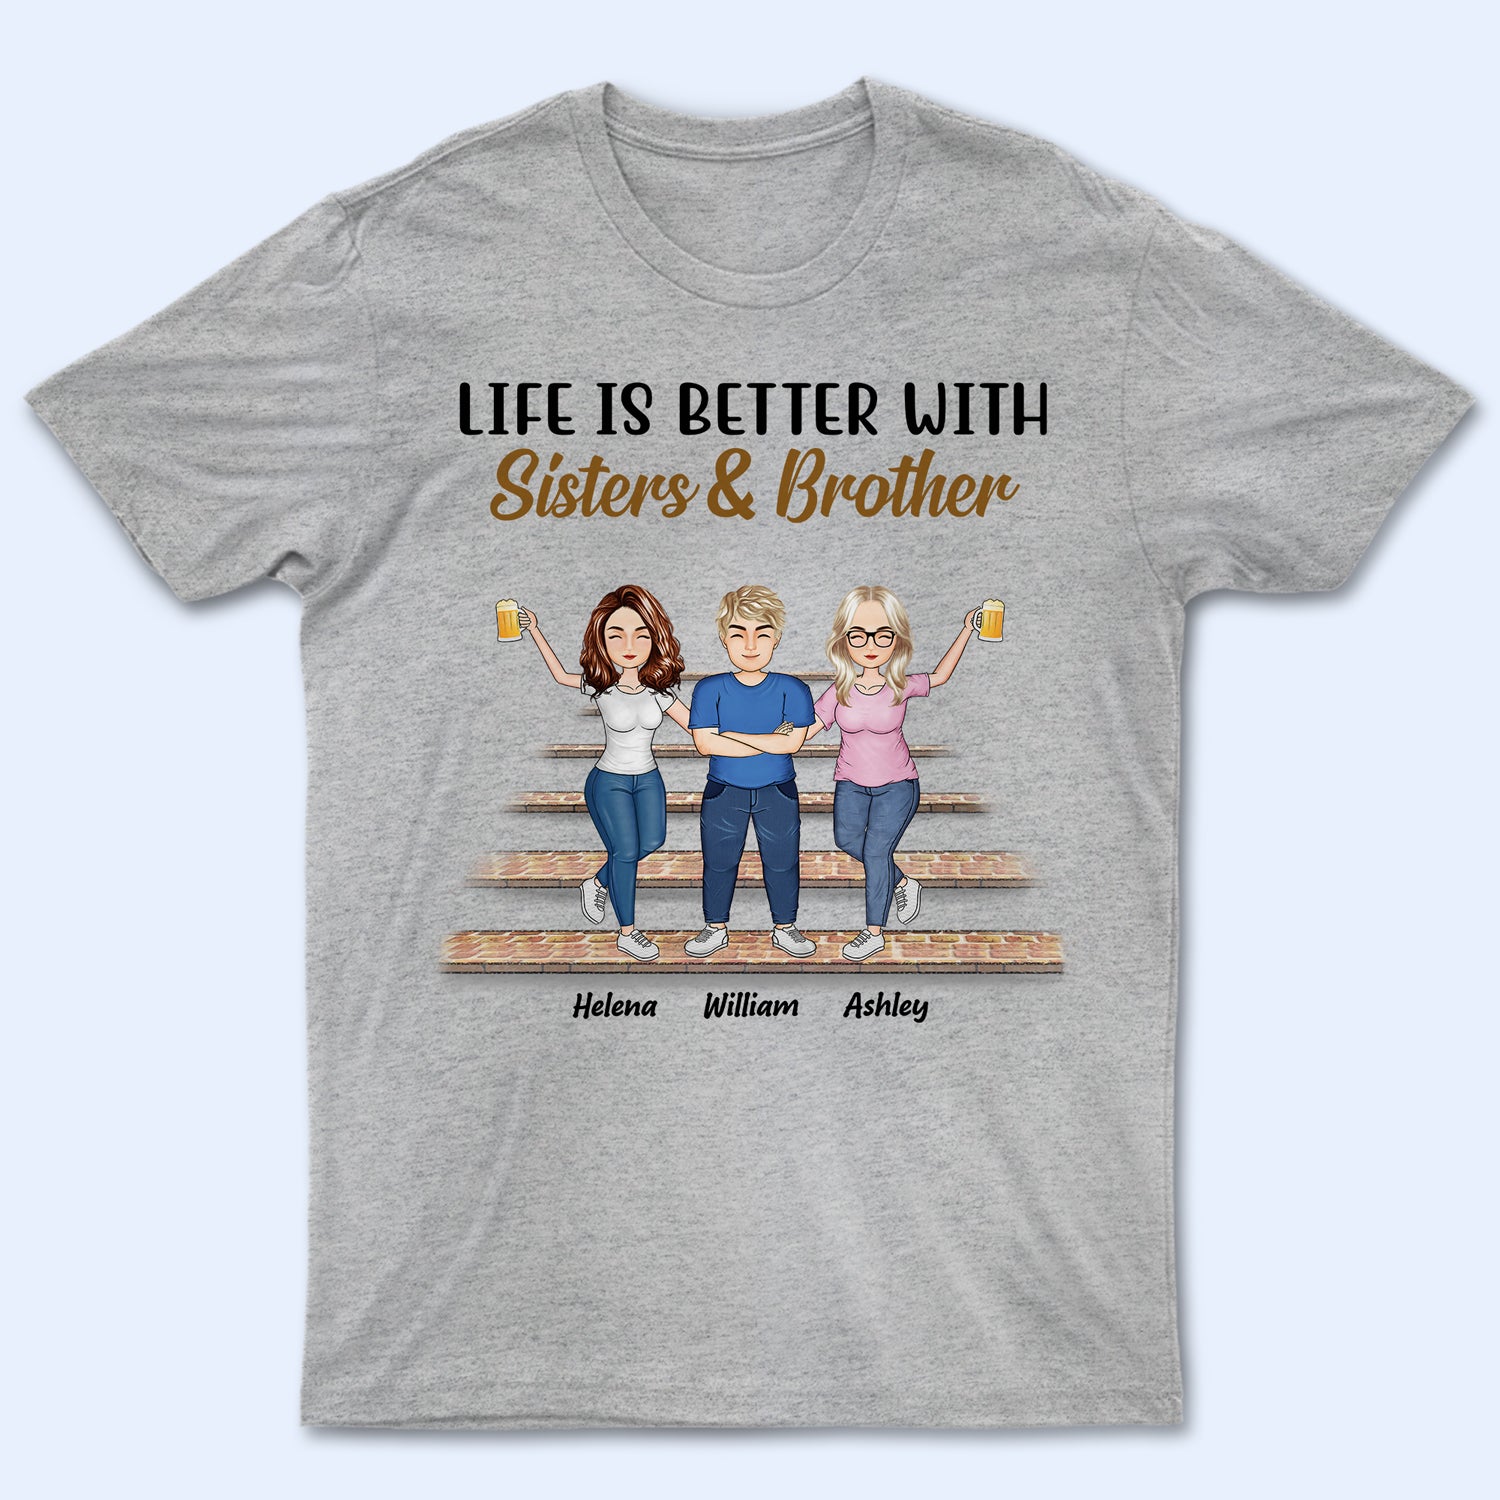 Life Is Better With Sisters & Brothers - Gift For Siblings And Best Friends - Personalized Custom T Shirt